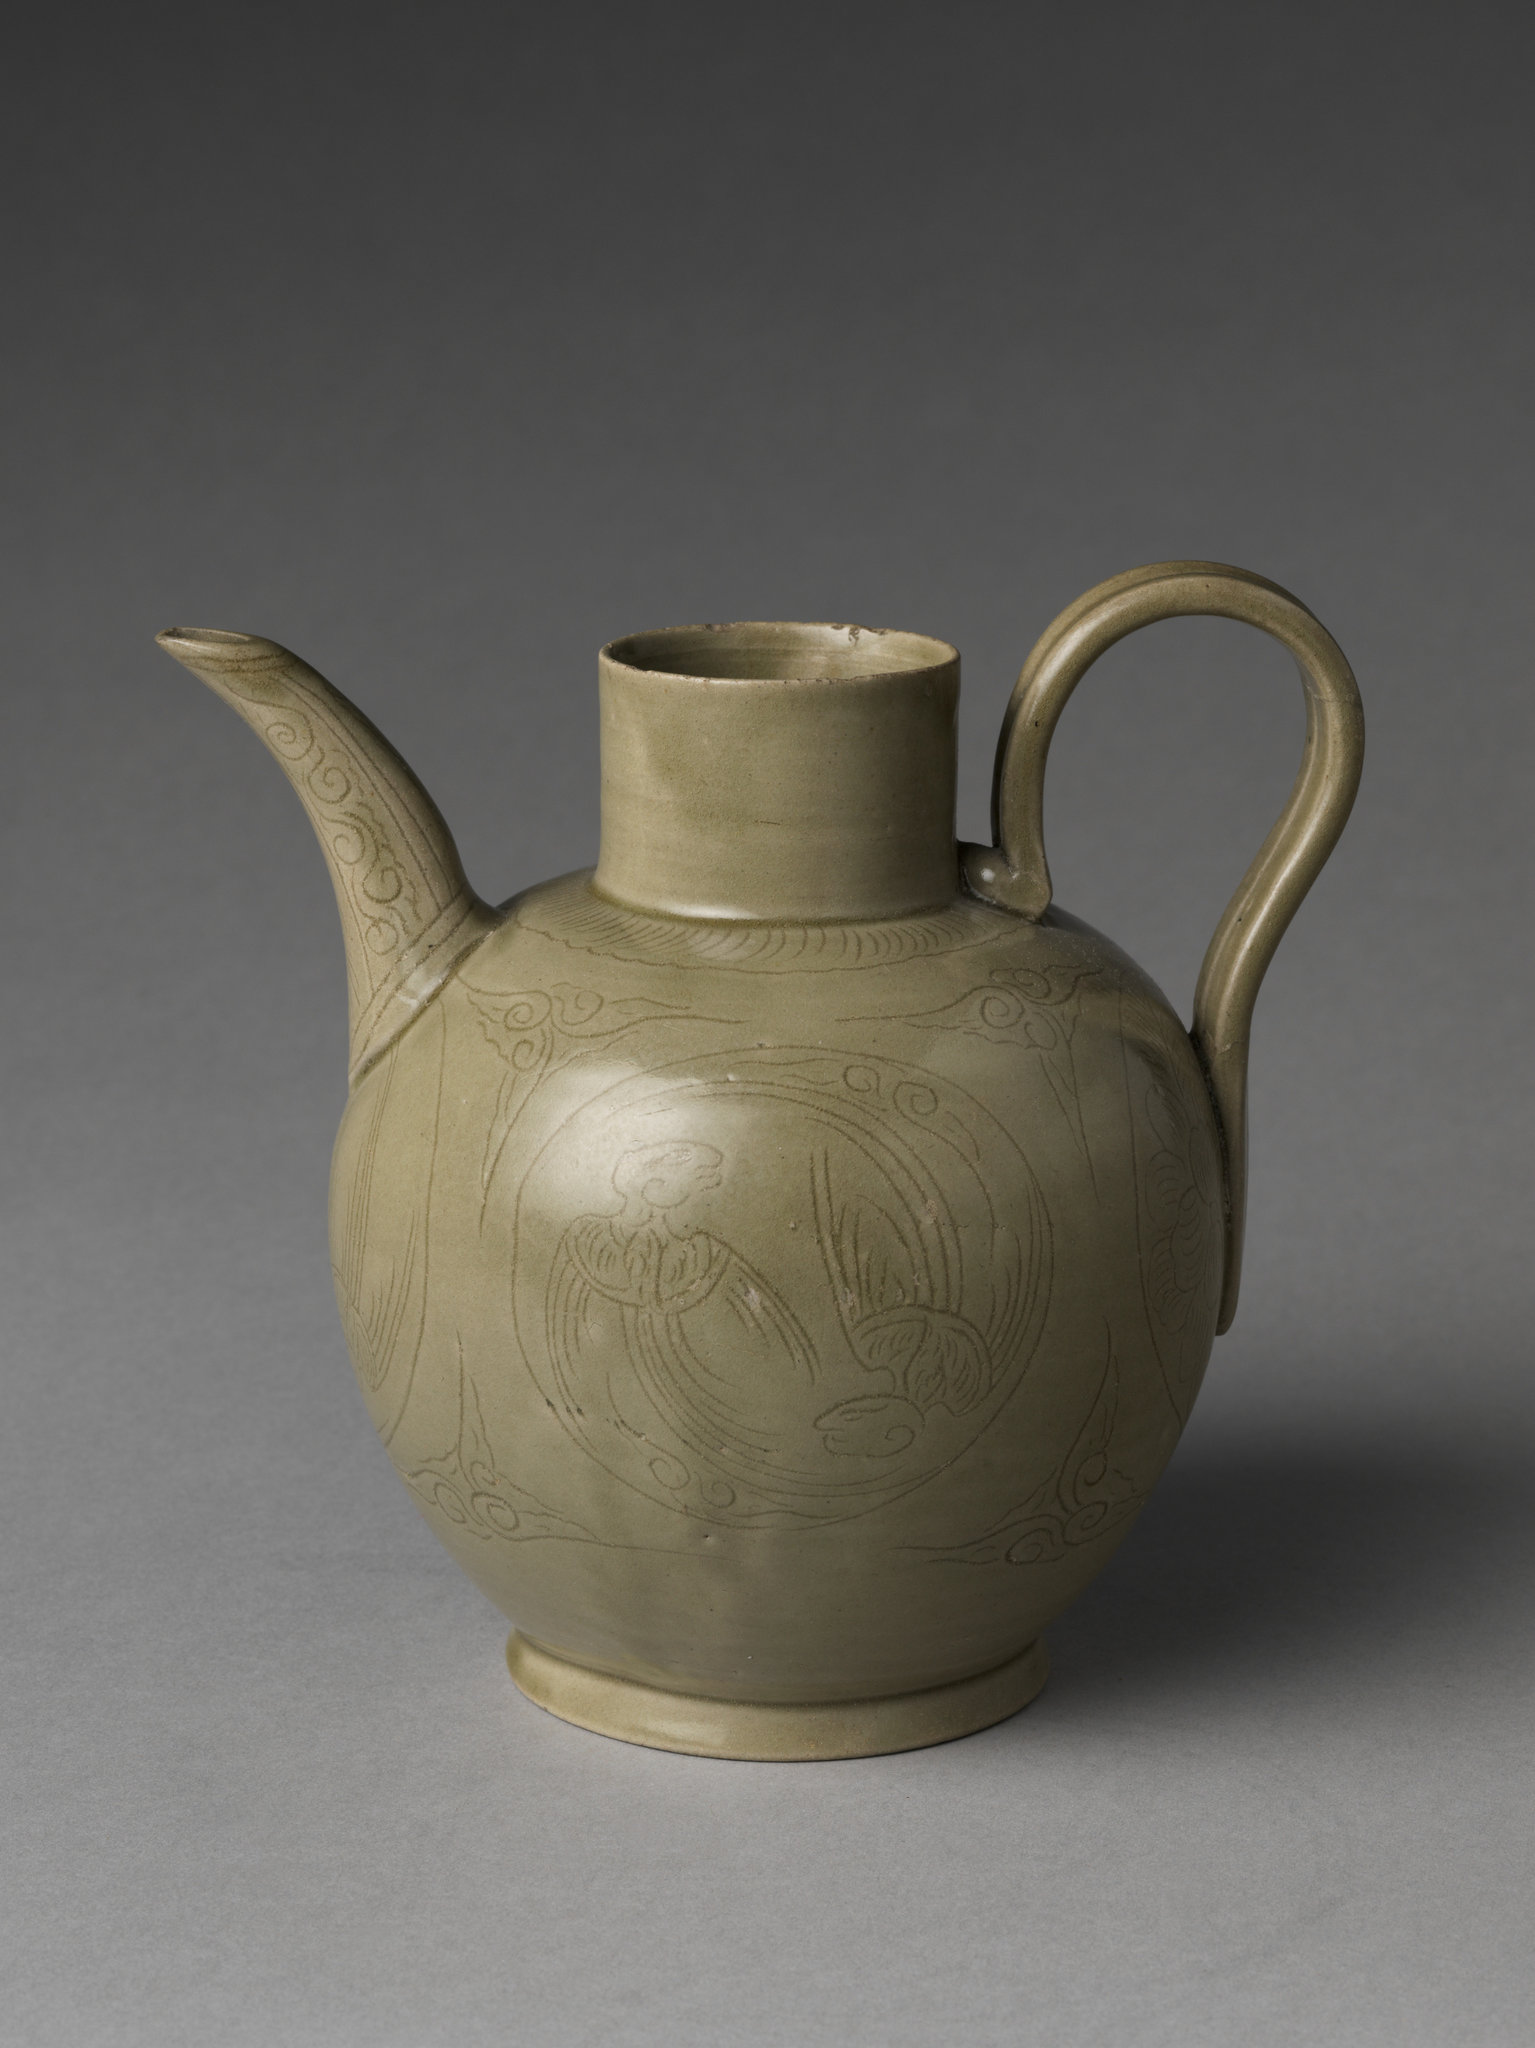 Ewer with Parrots, Five Dynasties (907–960), 10th century